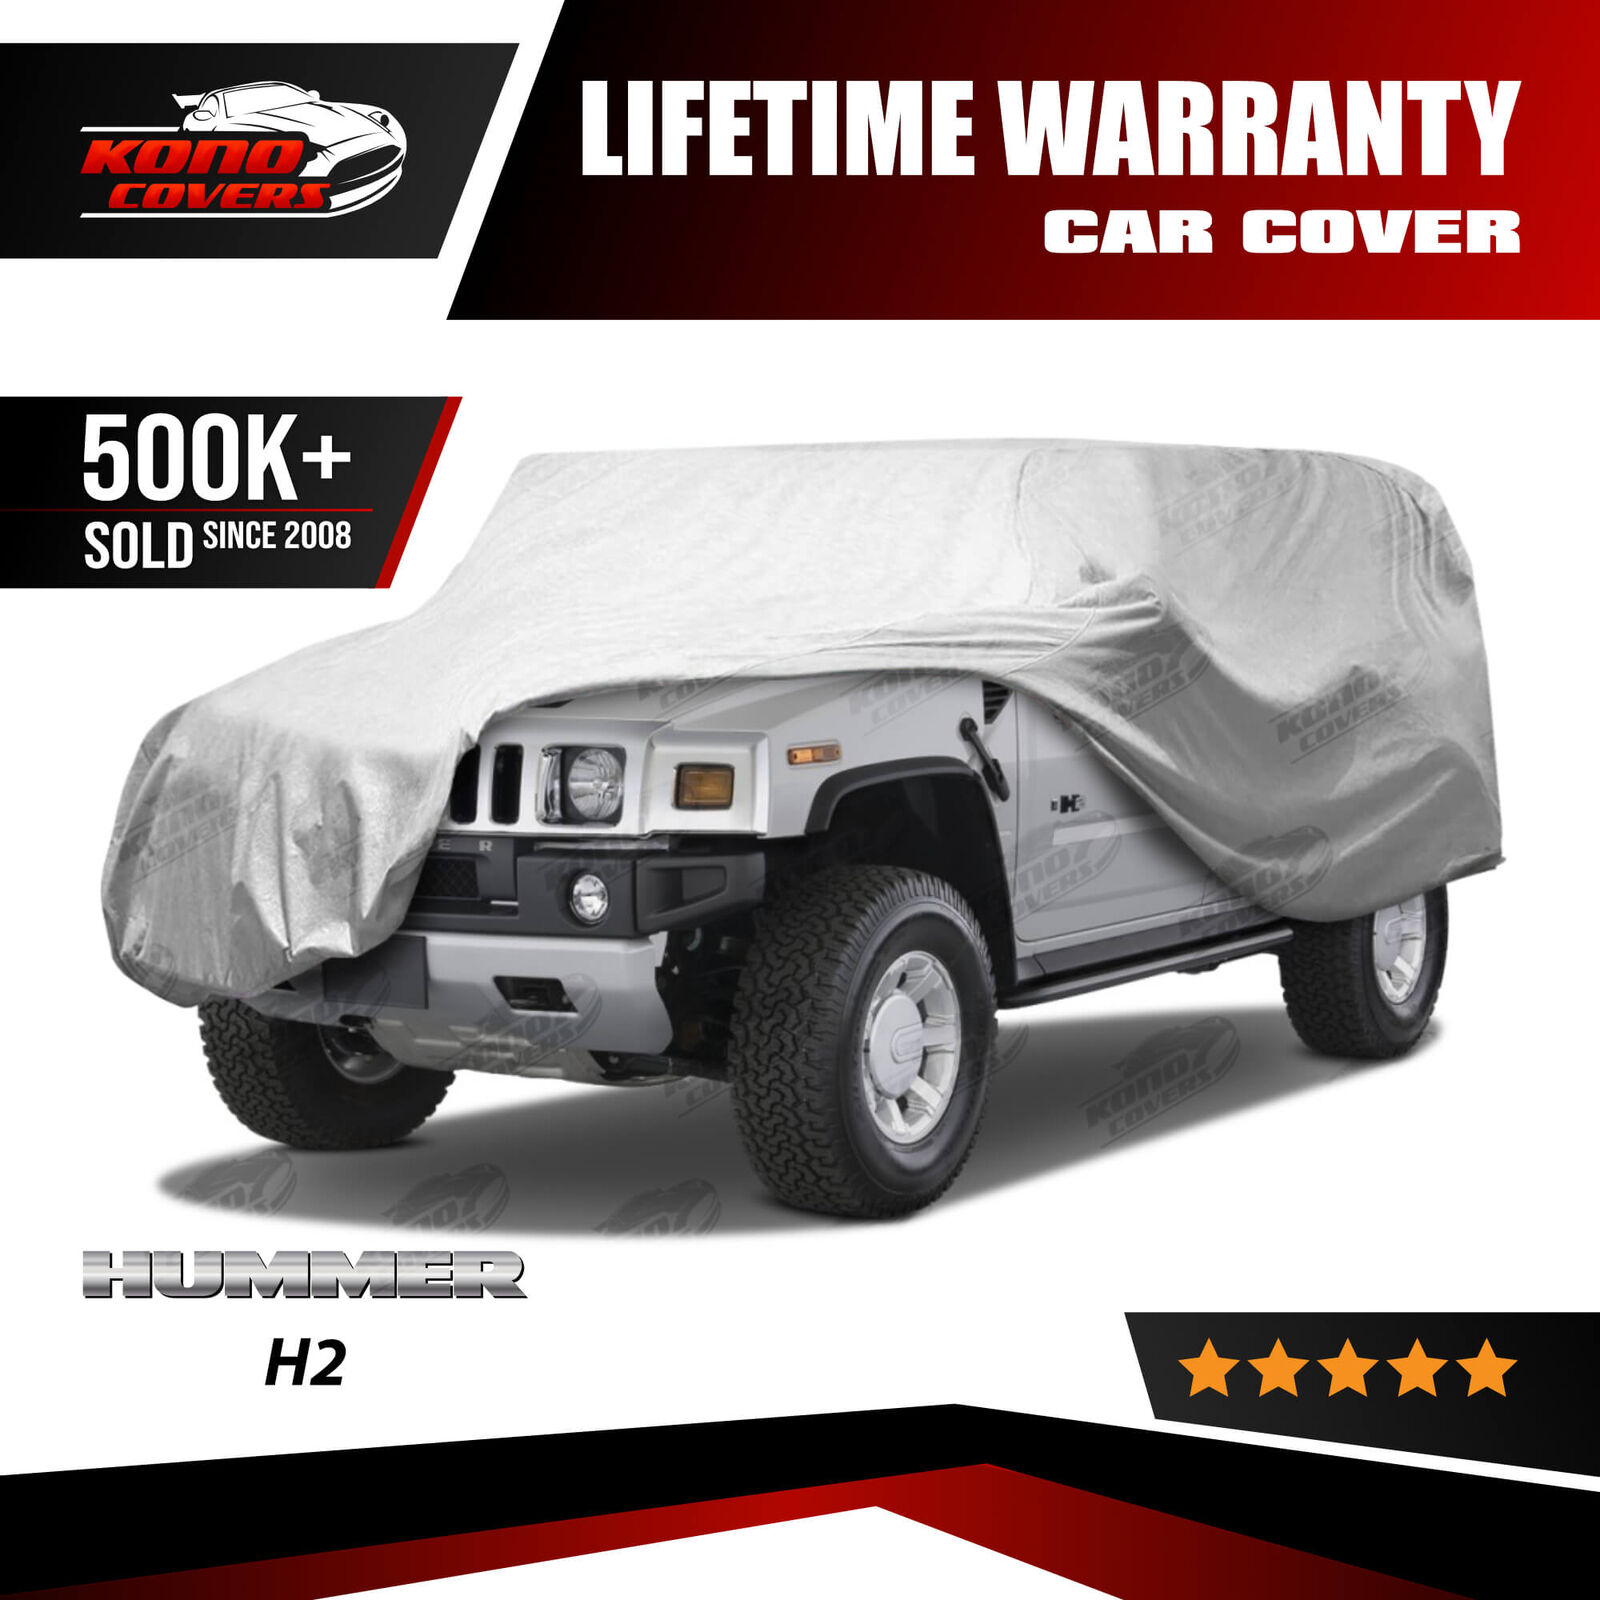 Hummer H2 Sport Utility 4 Layer Car Cover 2003 2004 2005 2006 2007 2008 2009